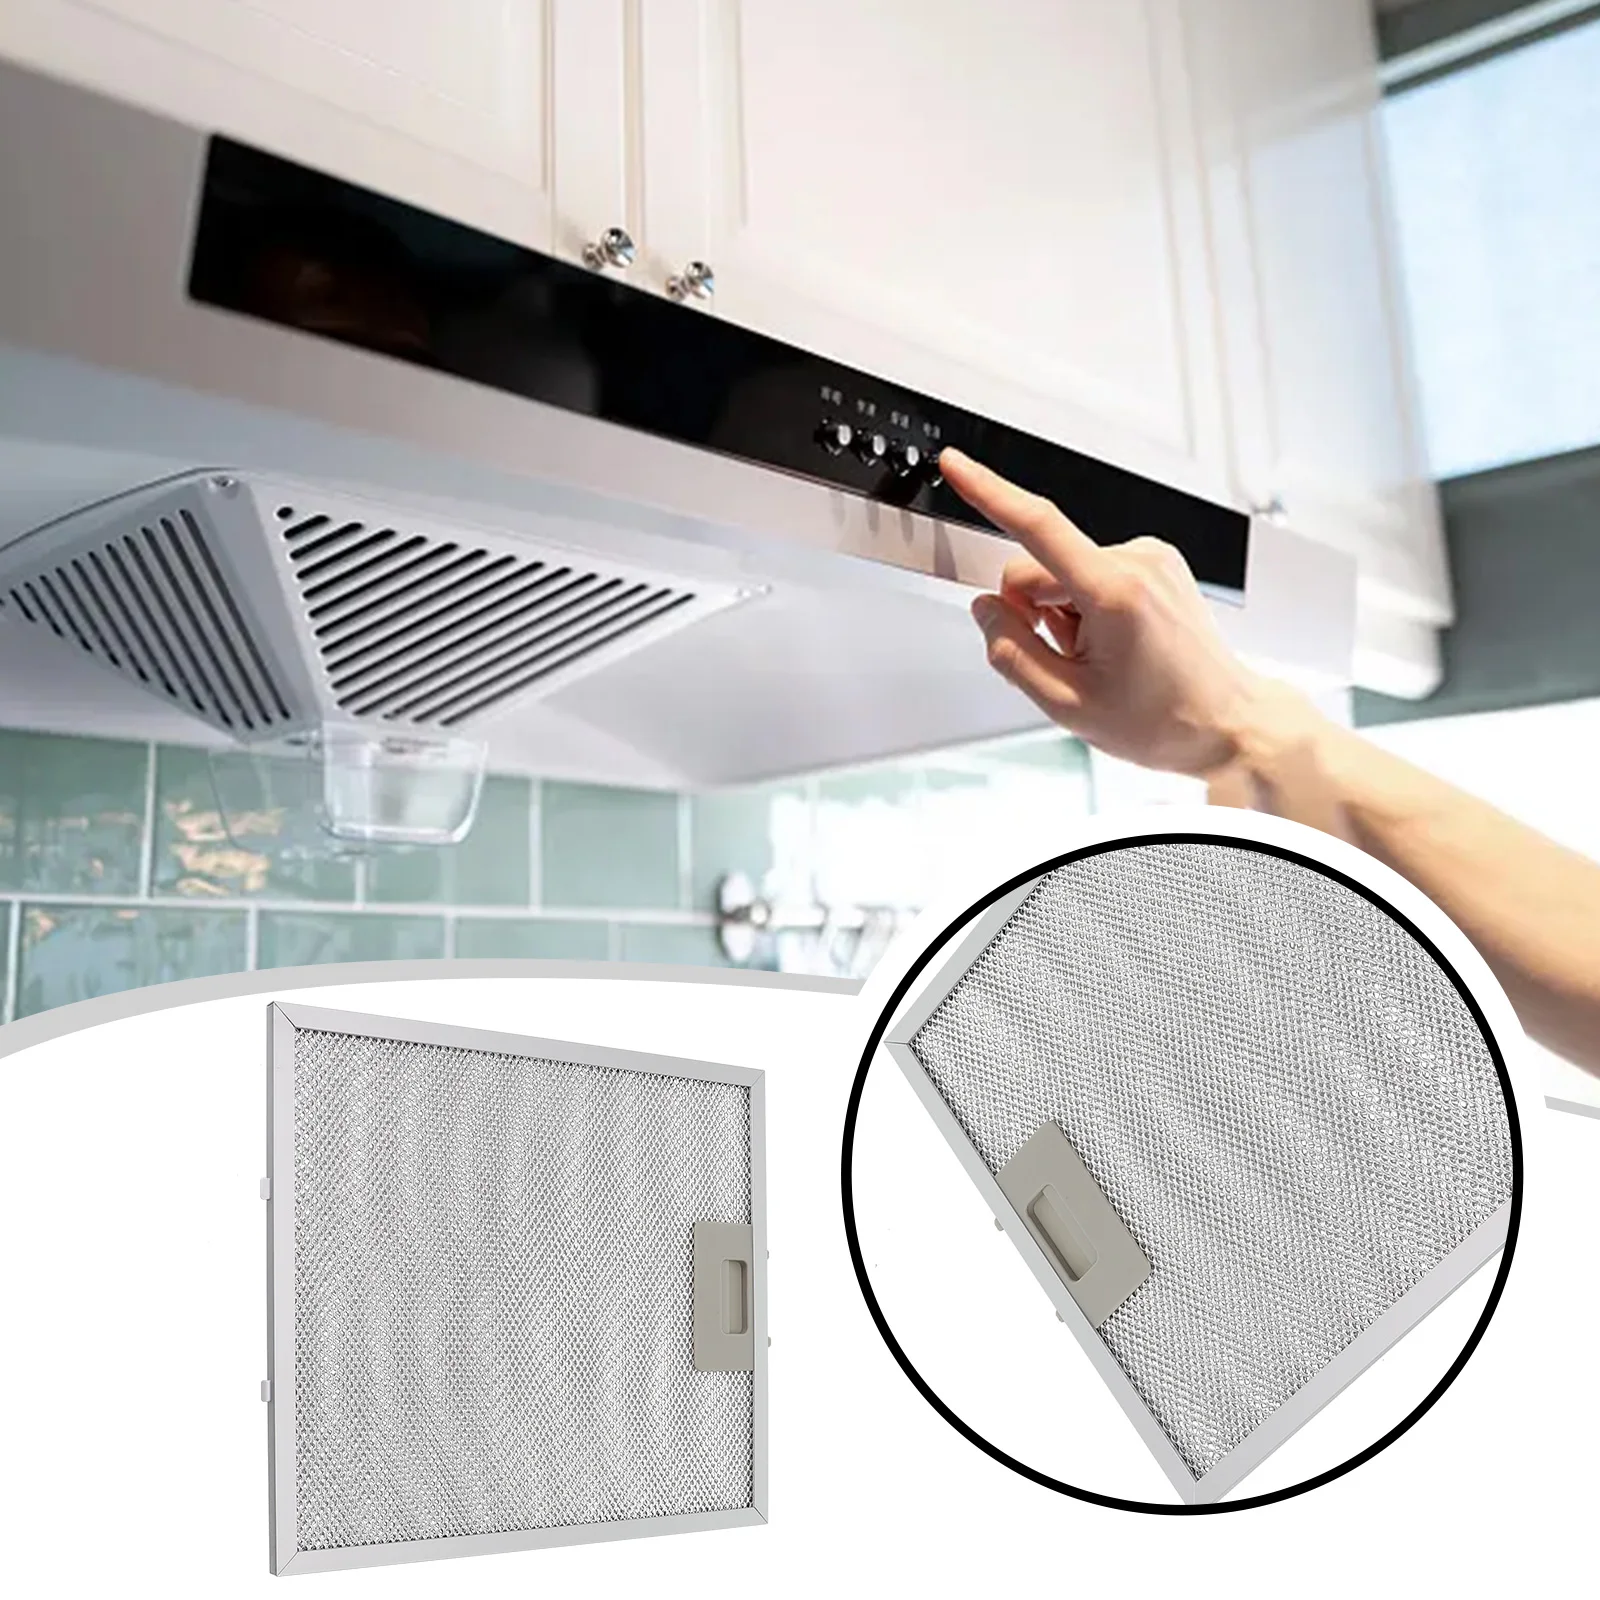 

Stainless Steel Hood Filter Silver Cooker Hood Filters 305 x 267 x 9mm Easy Replacement Improved Range Hood Performance